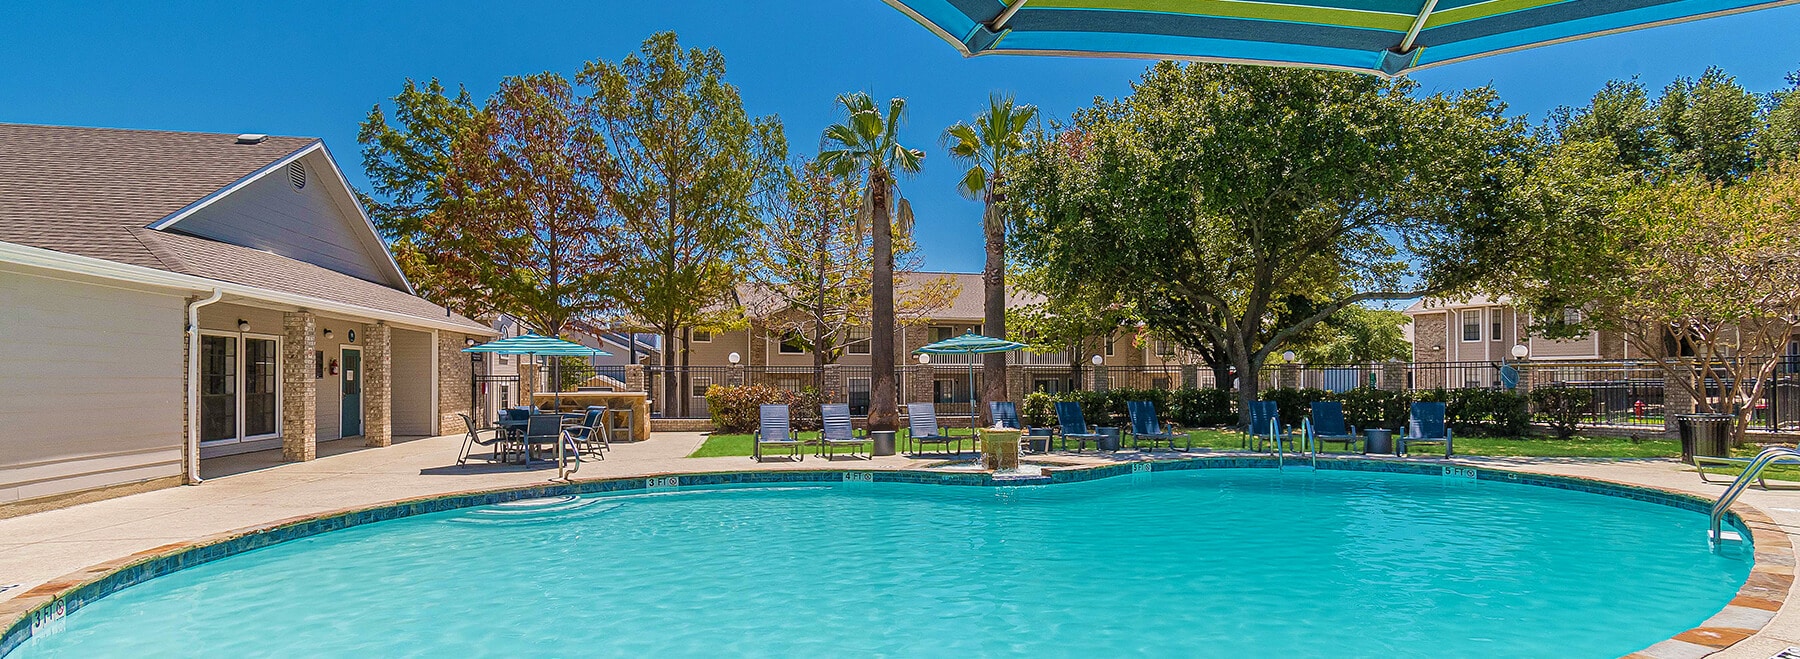 Image overlooking the community pool with the Amenity Center in the background surrounded by palm trees.